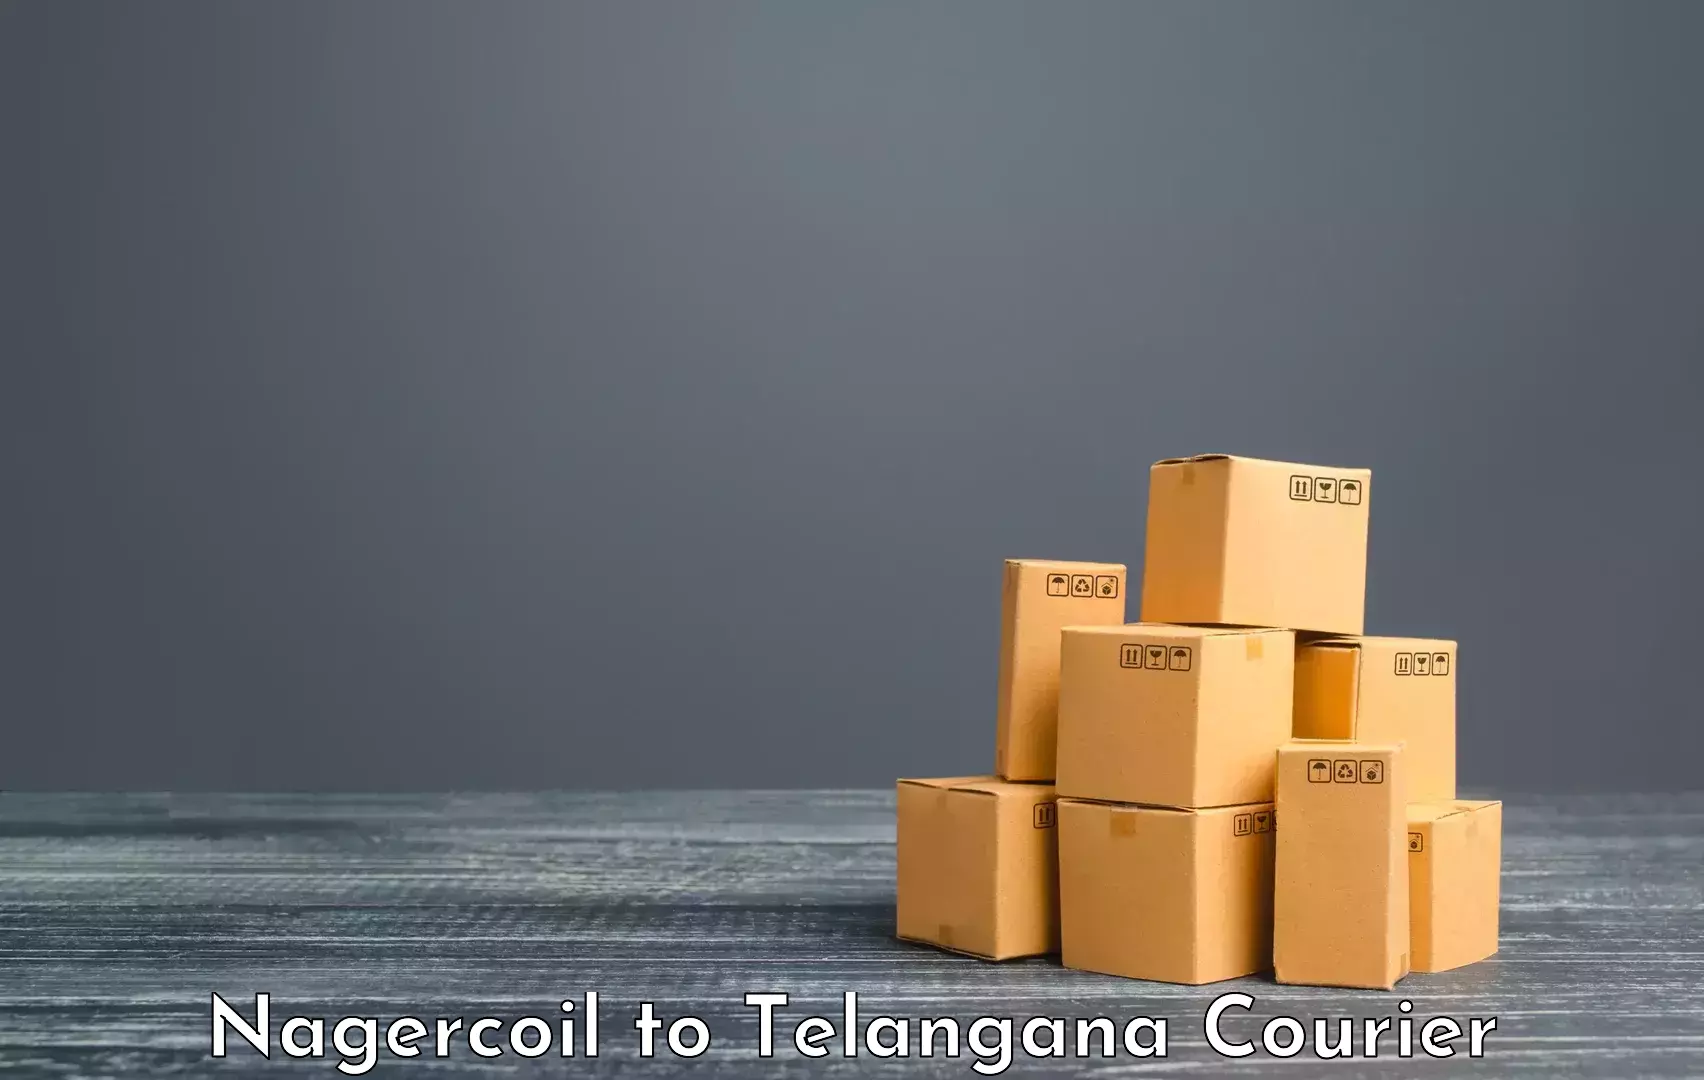 Online luggage shipping booking Nagercoil to Jammikunta